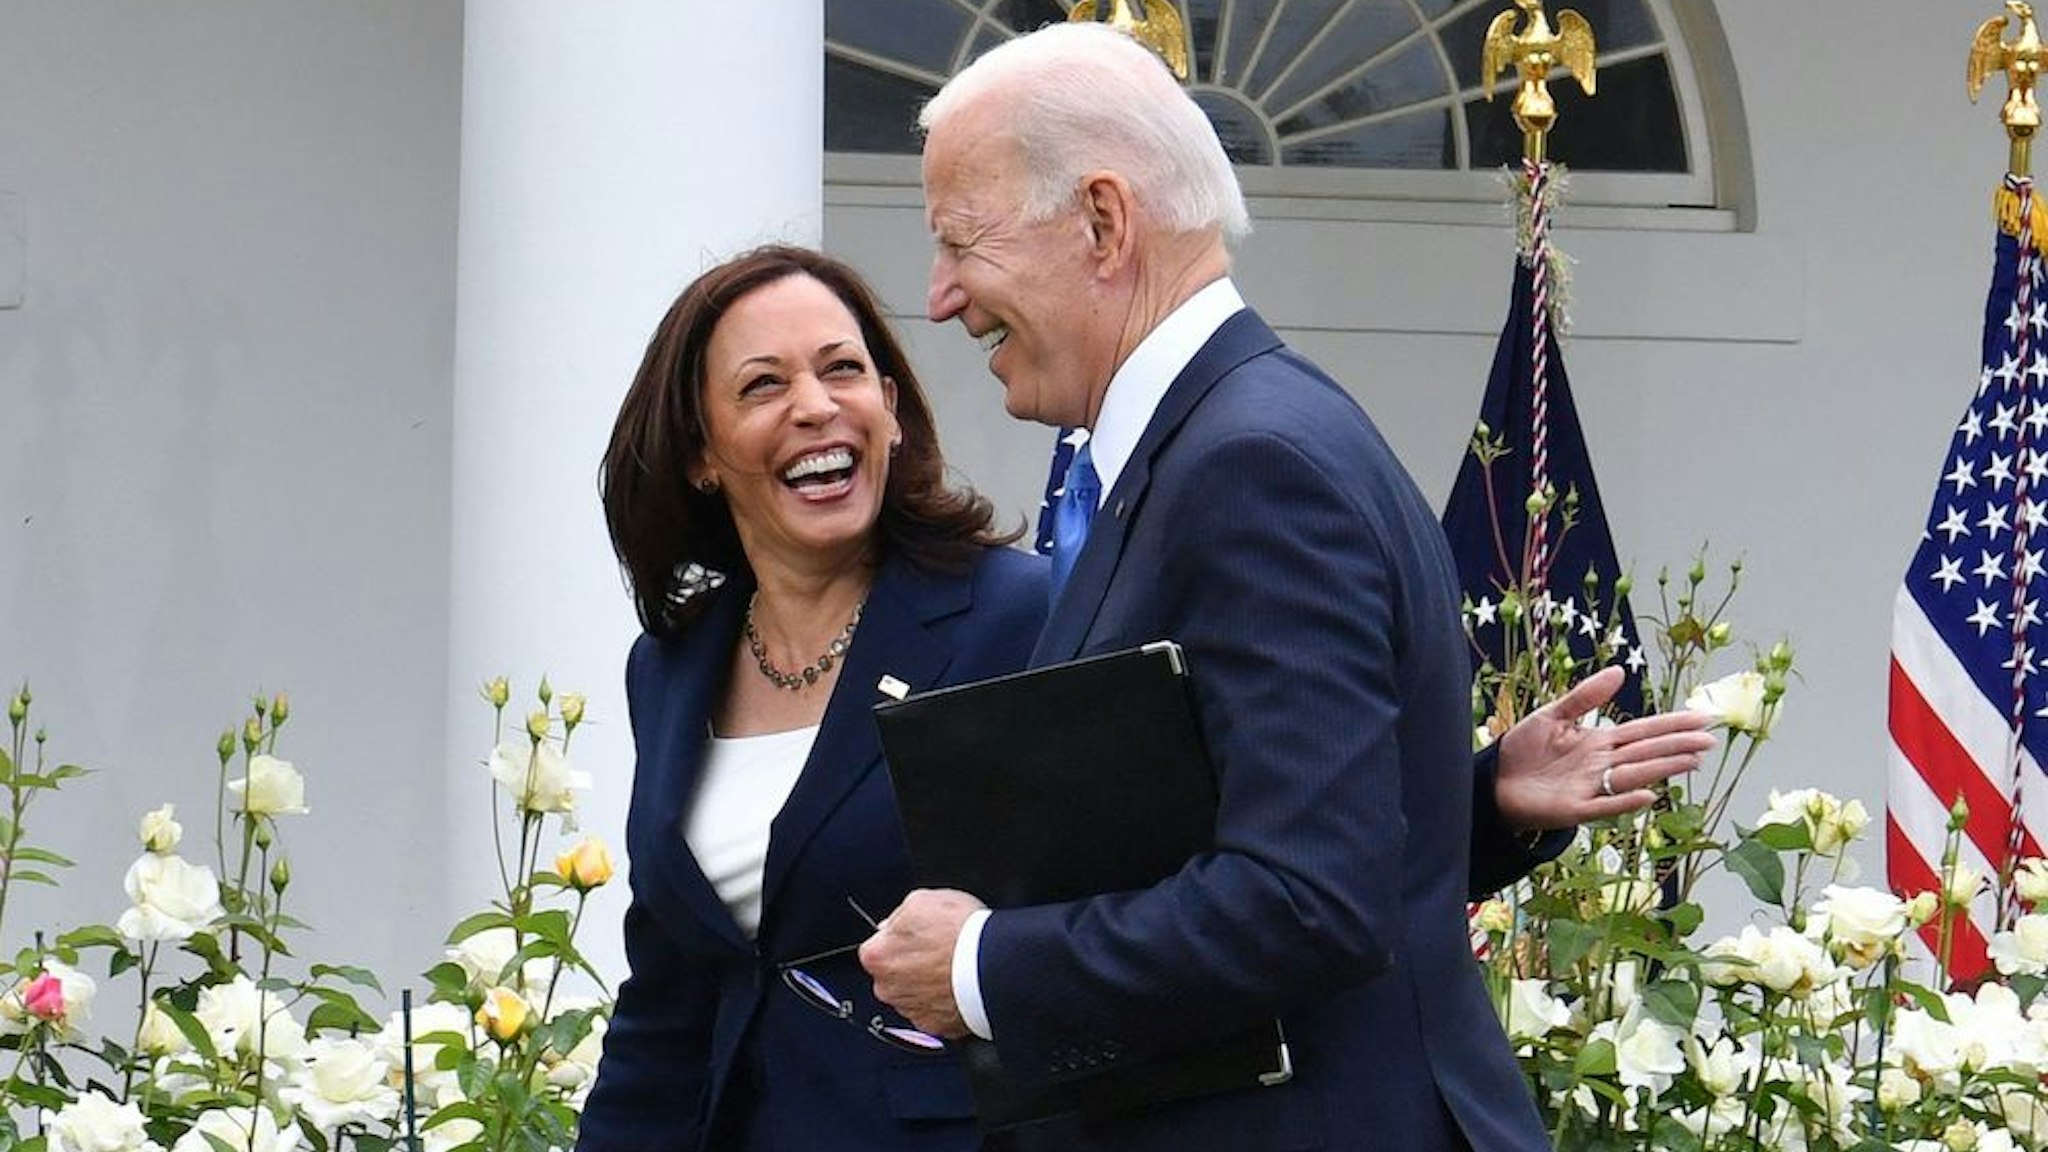 US Vice President Kamala Harris and US President Joe Biden leave after the President delivered remarks on Covid-19 response and the vaccination program, from the Rose Garden of the White House, Washington, DC on May 13, 2021. (Photo by Nicholas Kamm / AFP) (Photo by NICHOLAS KAMM/AFP via Getty Images)